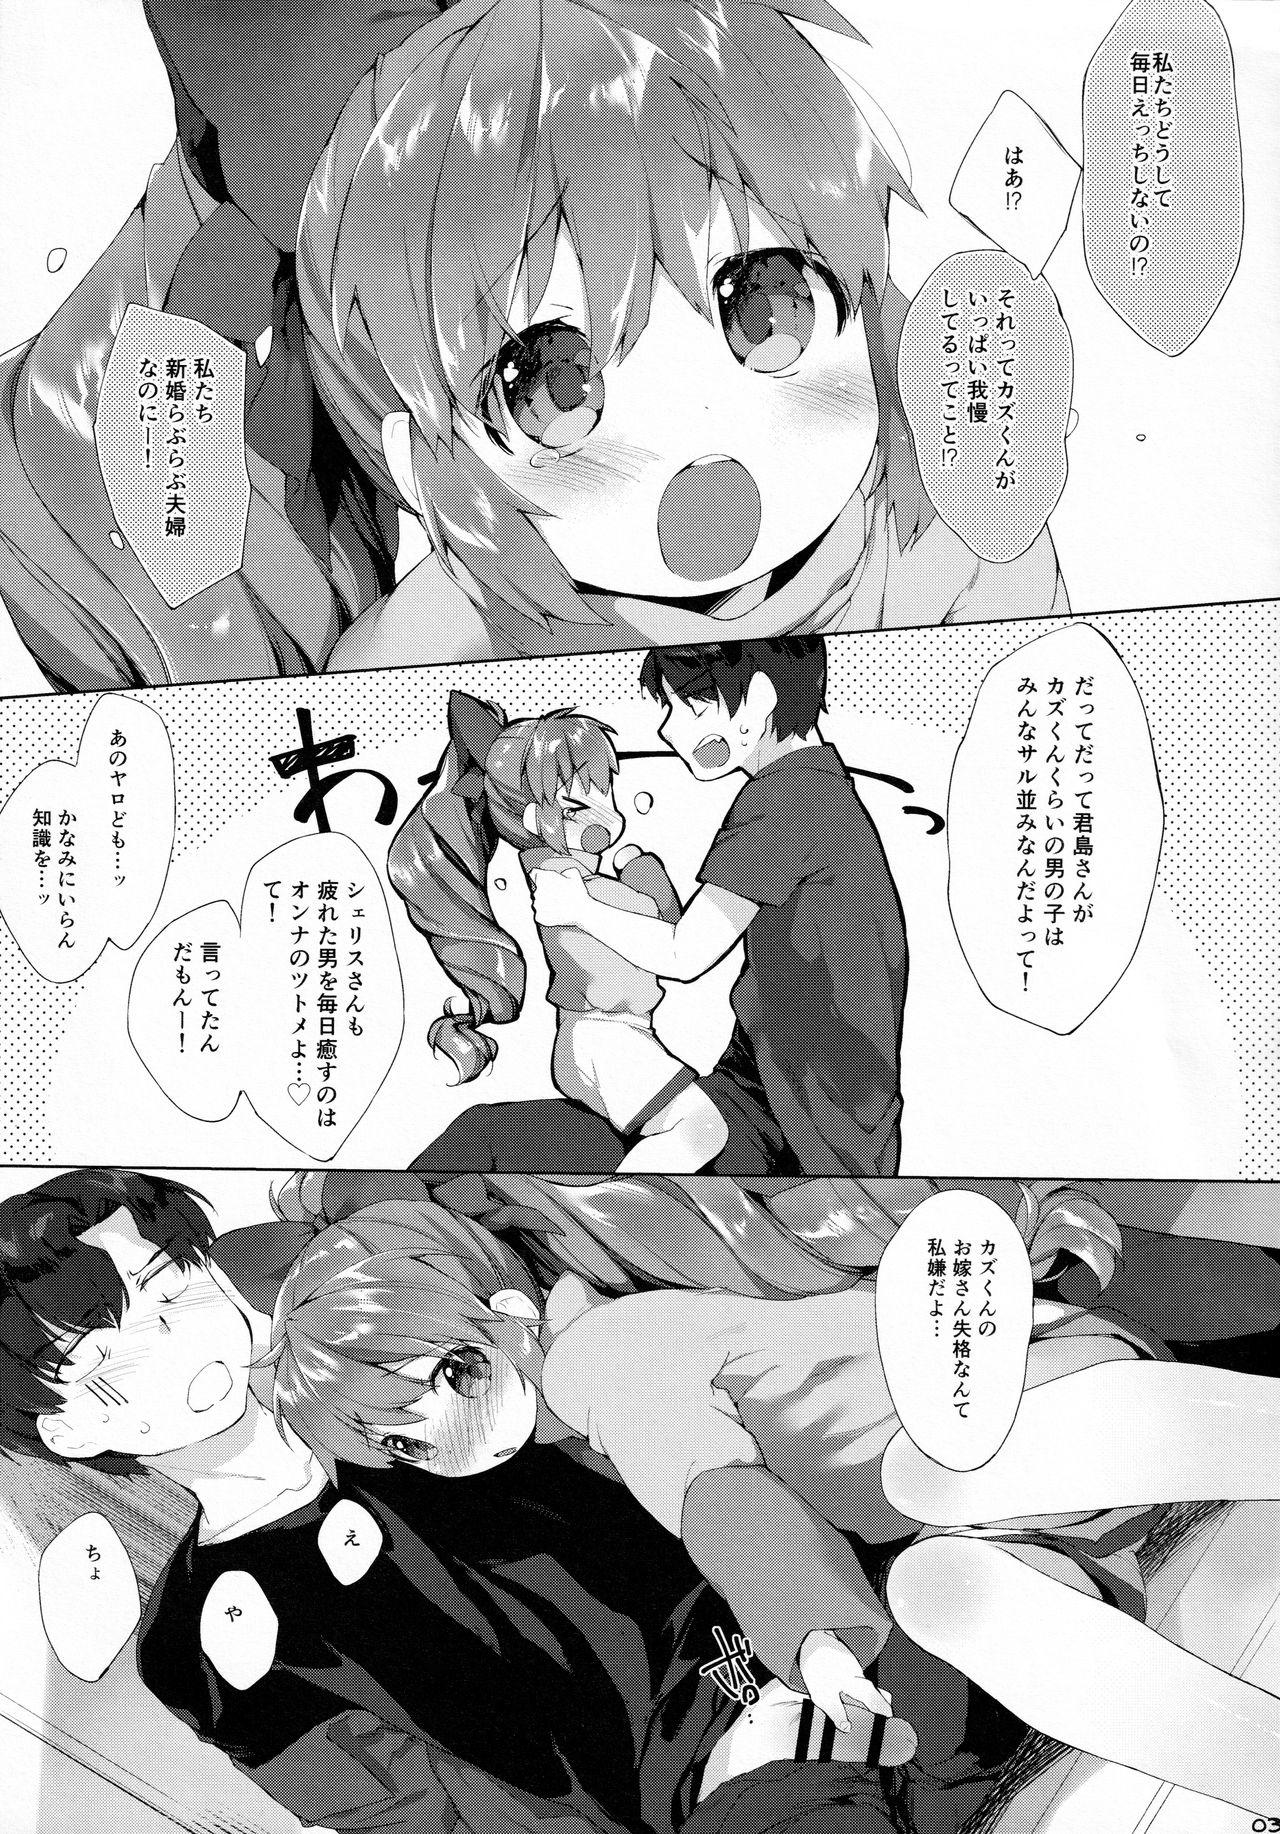 Socks Uchi no Yousai. - S-cry-ed Best Blow Jobs Ever - Page 3